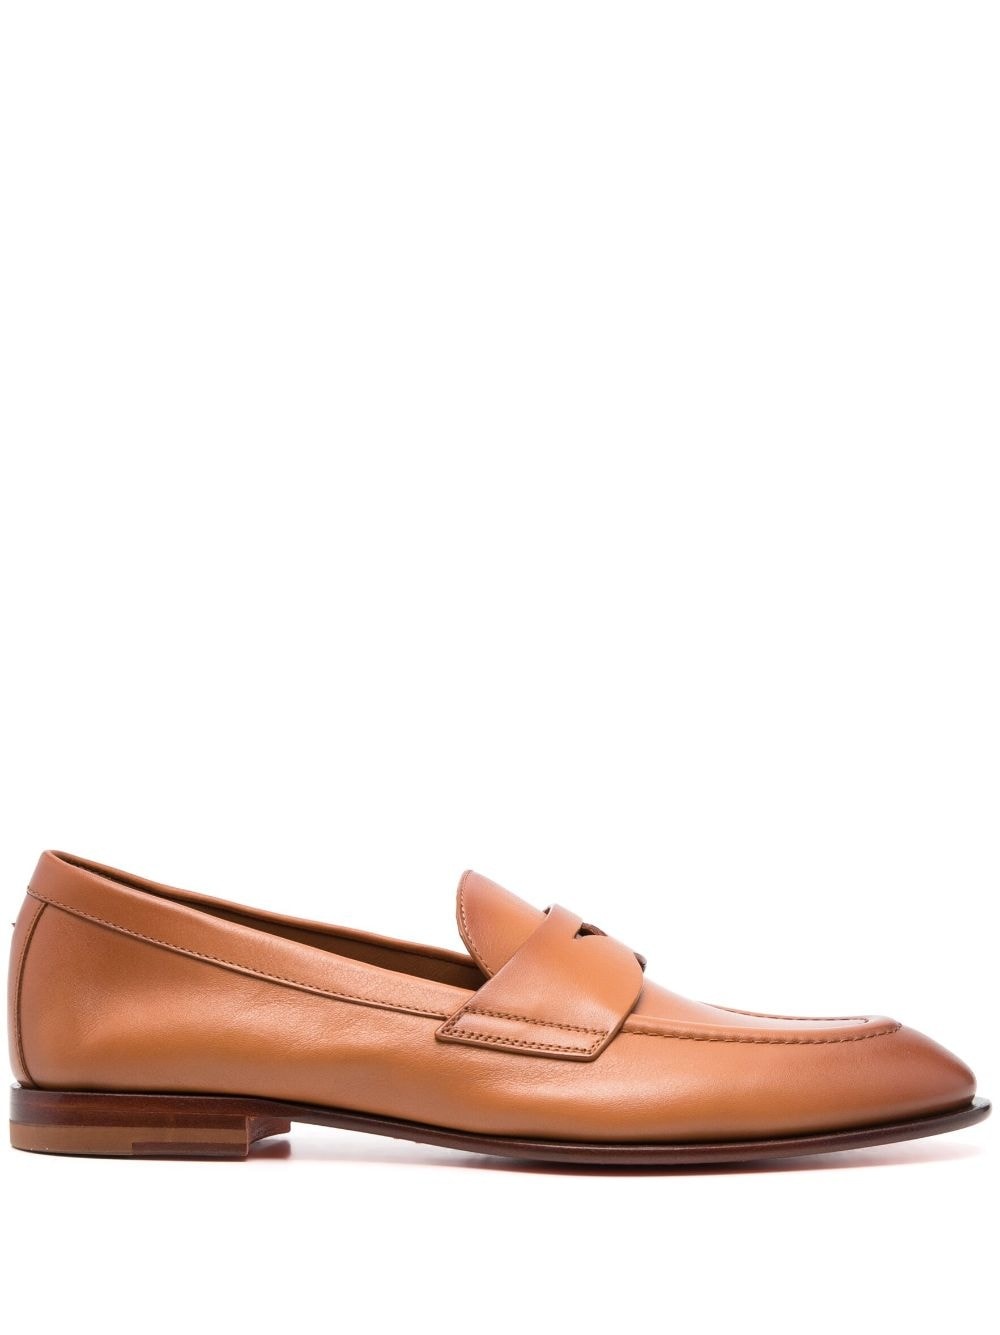 flat-sole leather loafers - 1